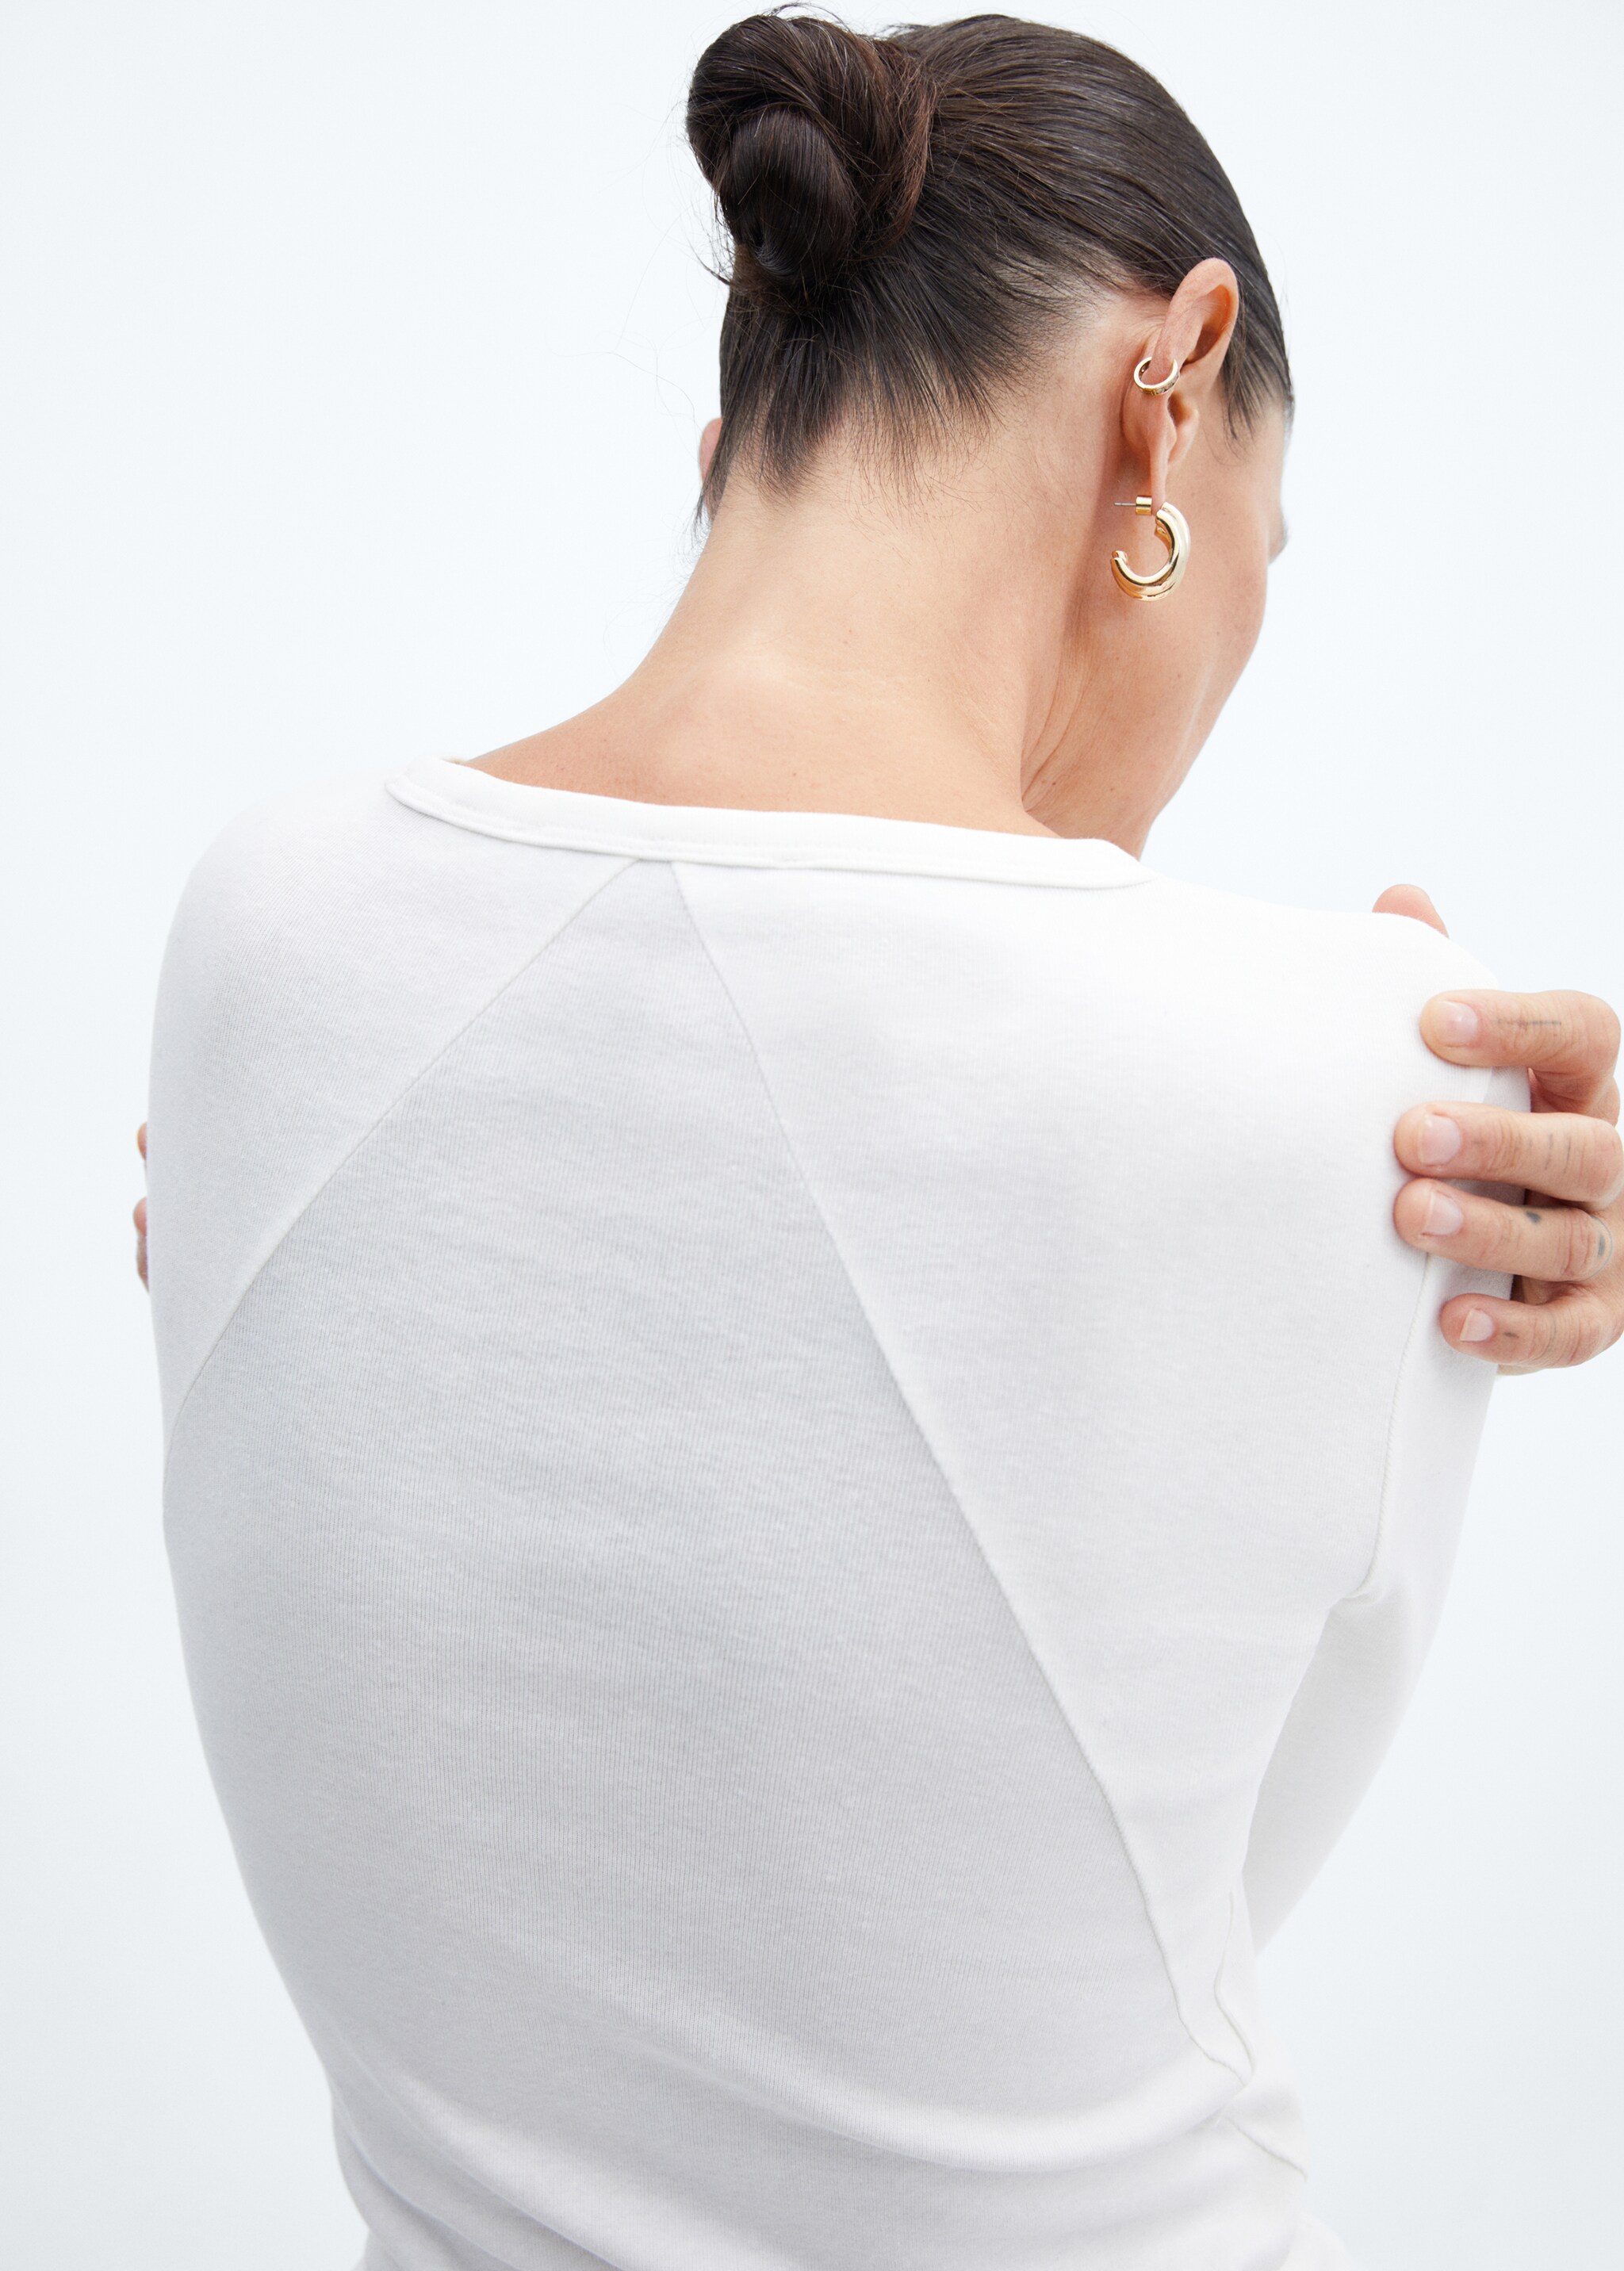 Cotton T-shirt with seams - Details of the article 6